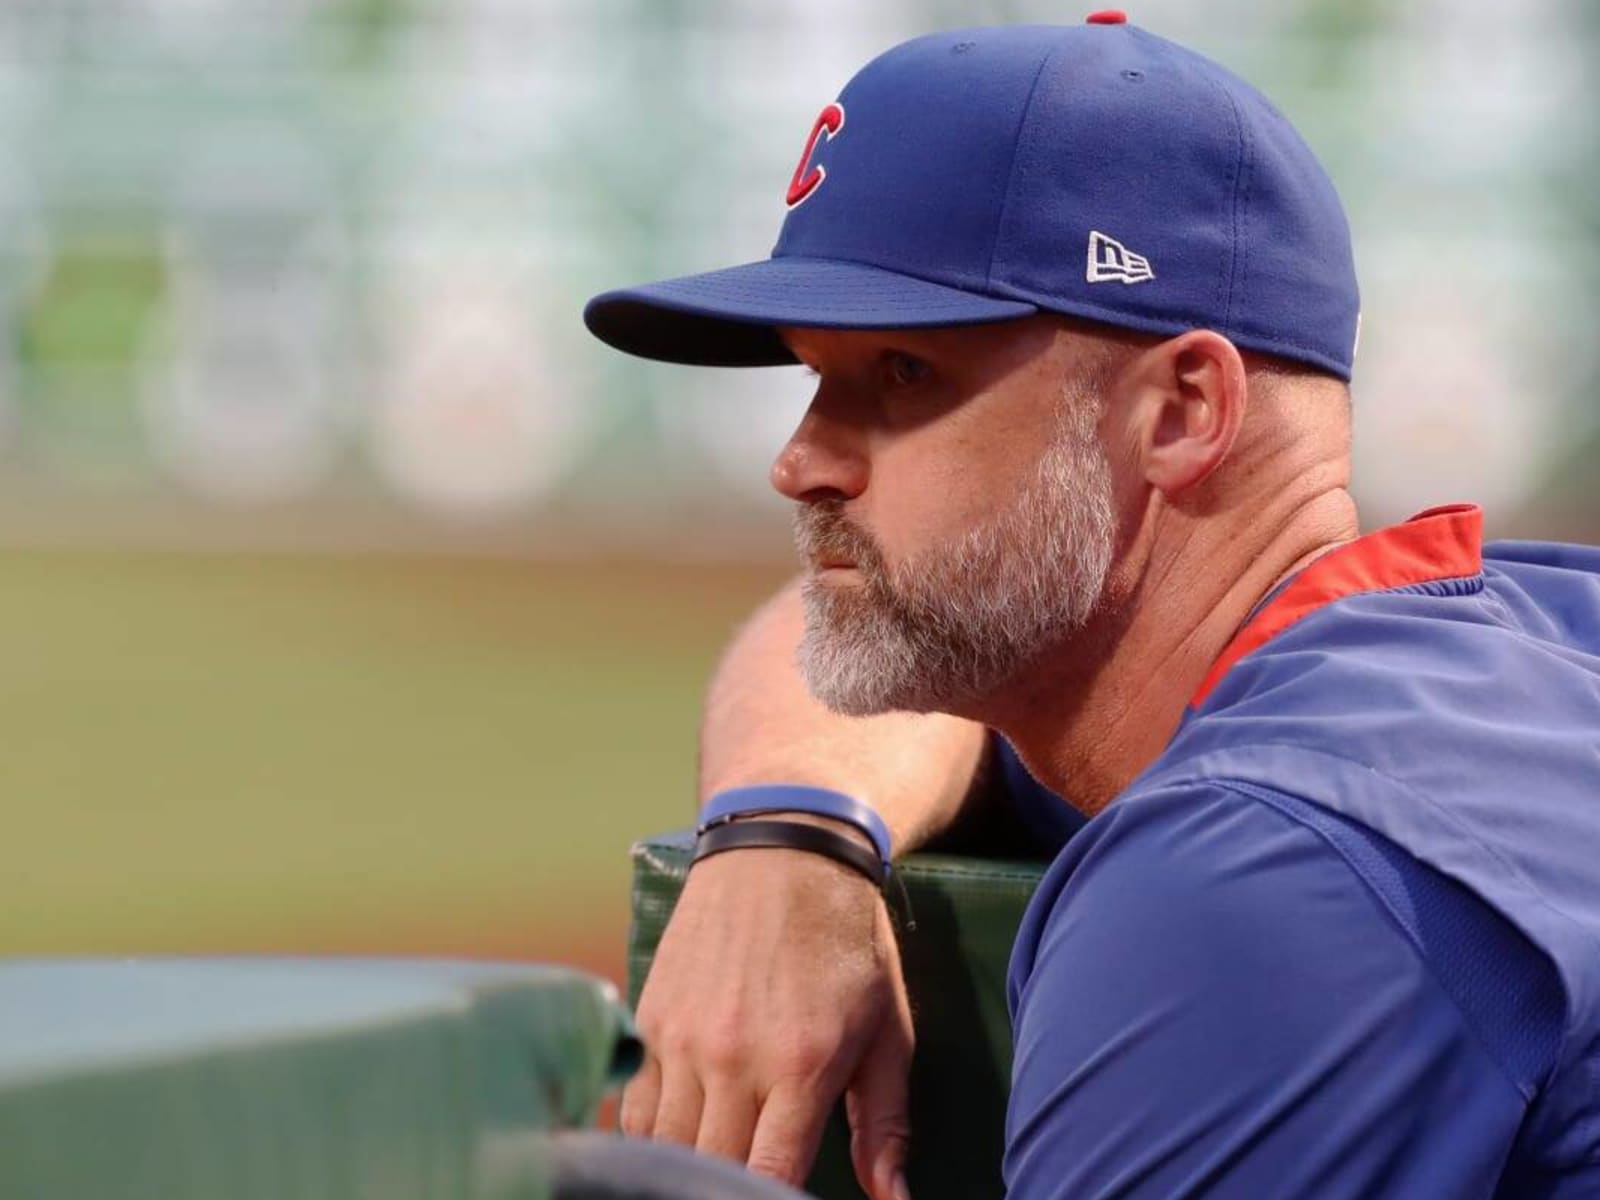 Chicago Cubs Hire David Ross to Replace Maddon as Manager, Chicago News